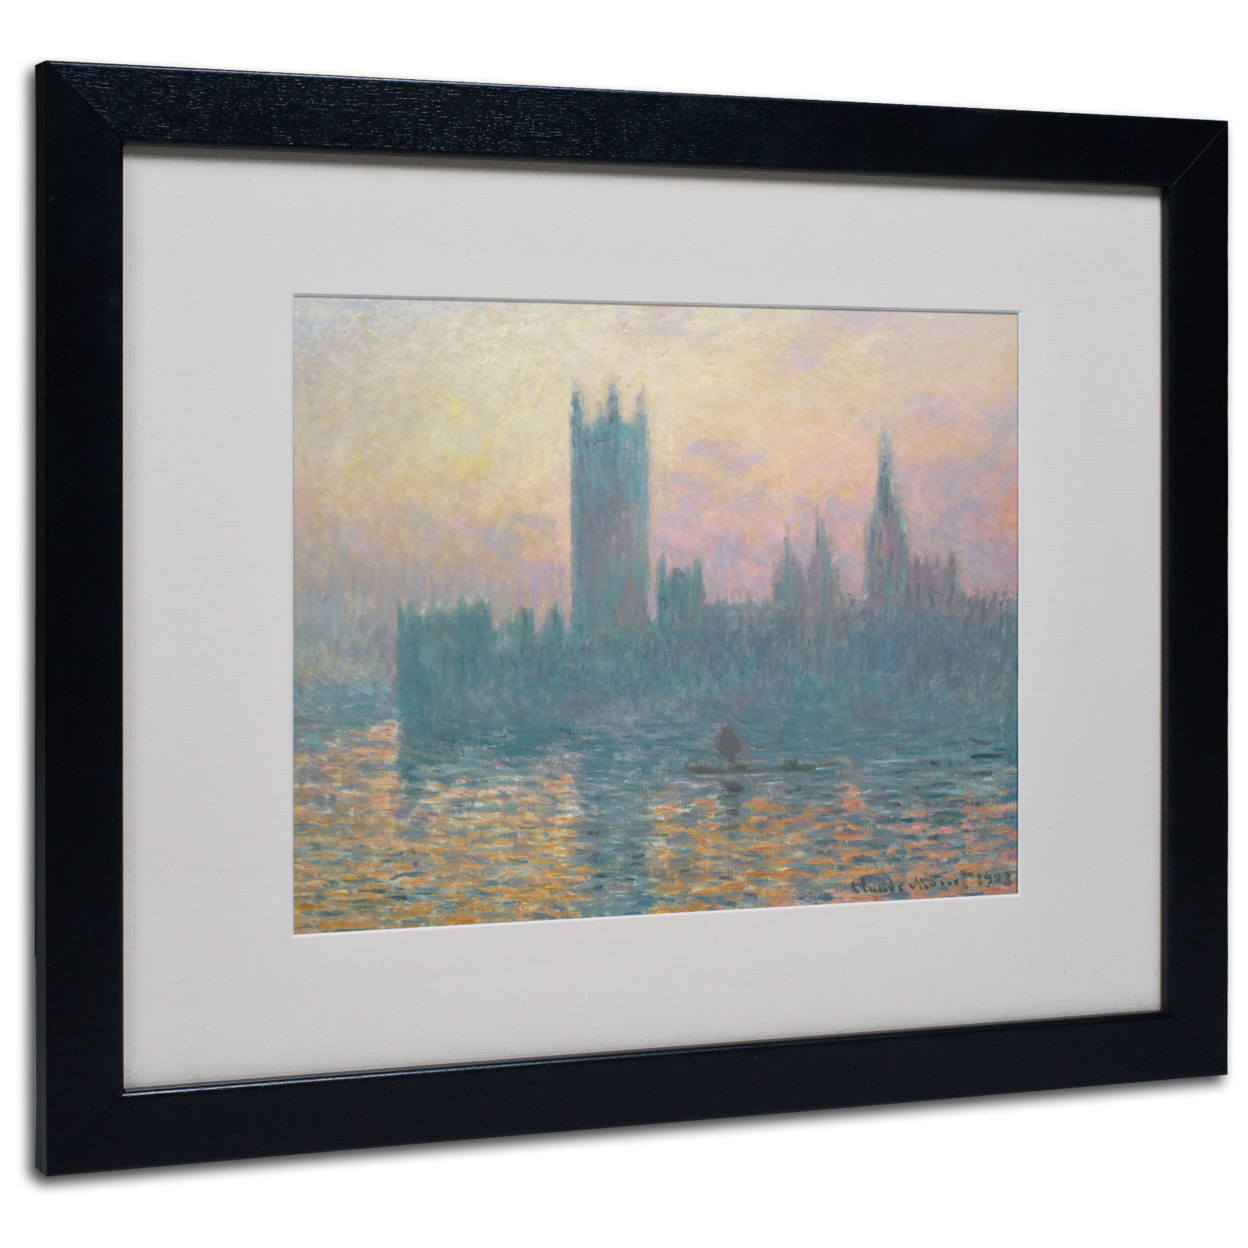 Claude Monet 'The Houses Of Parliament' Black Wooden Framed Art 18 X 22 Inches